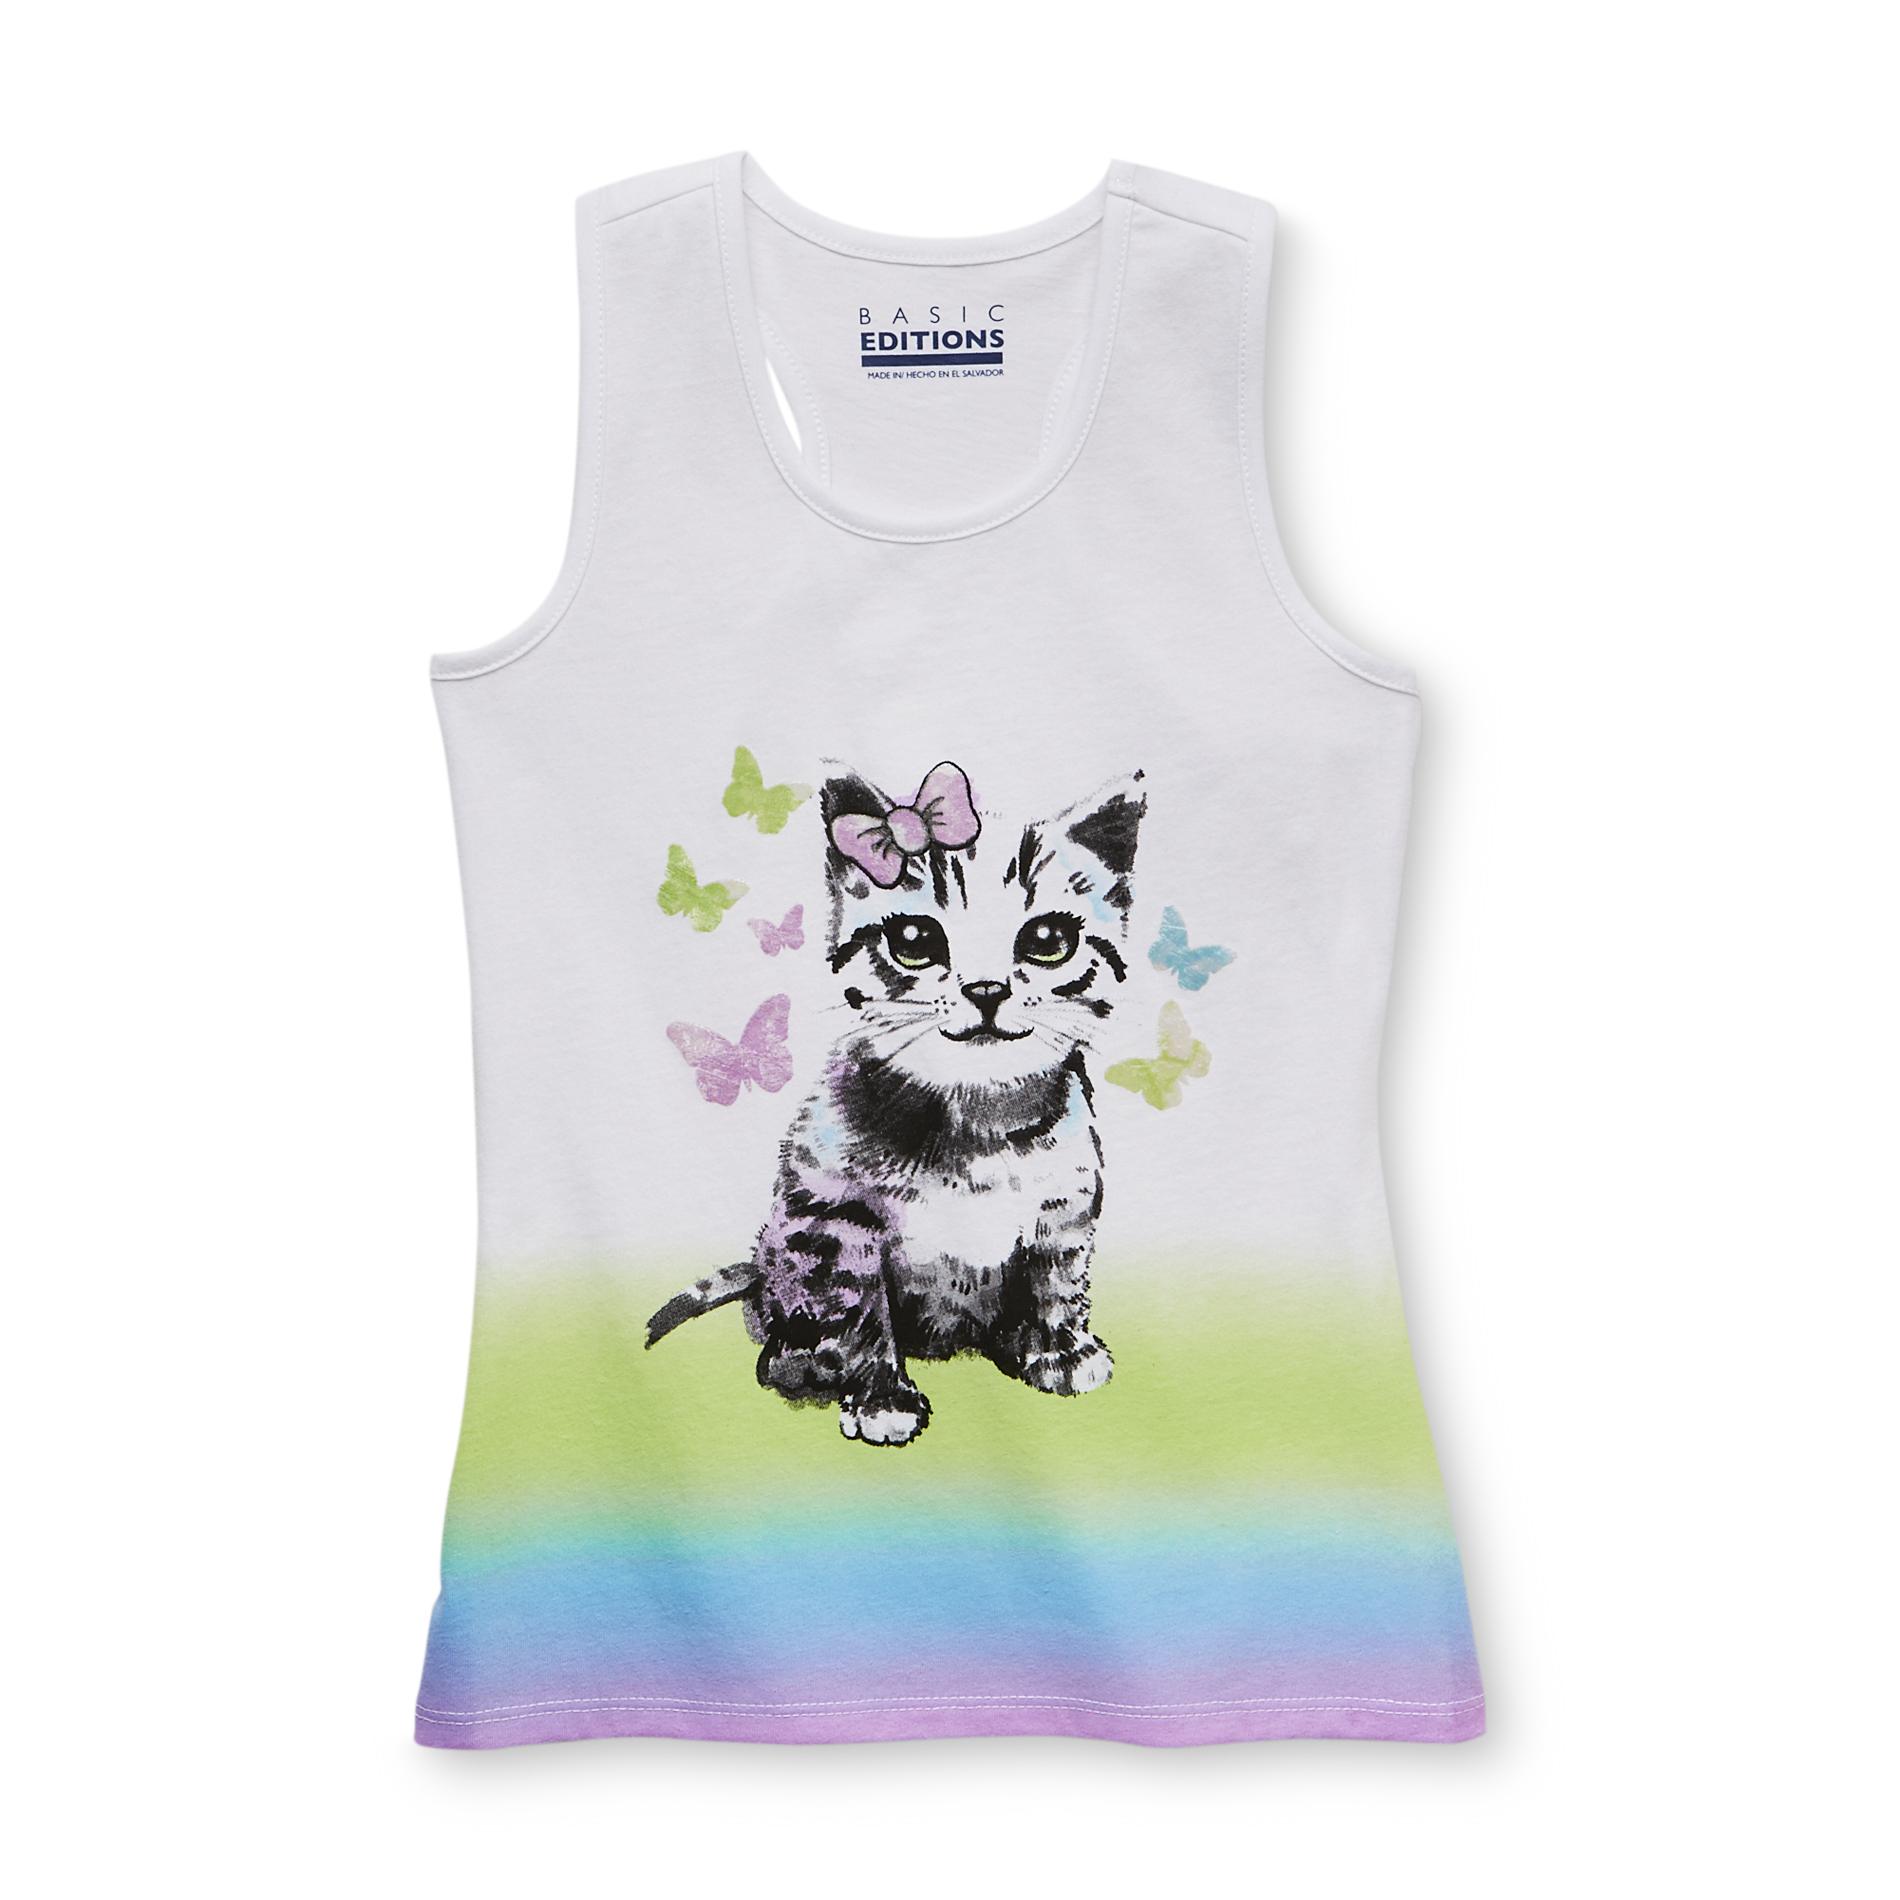 Basic Editions Girl's Racerback Tank Top - Ombre Cat